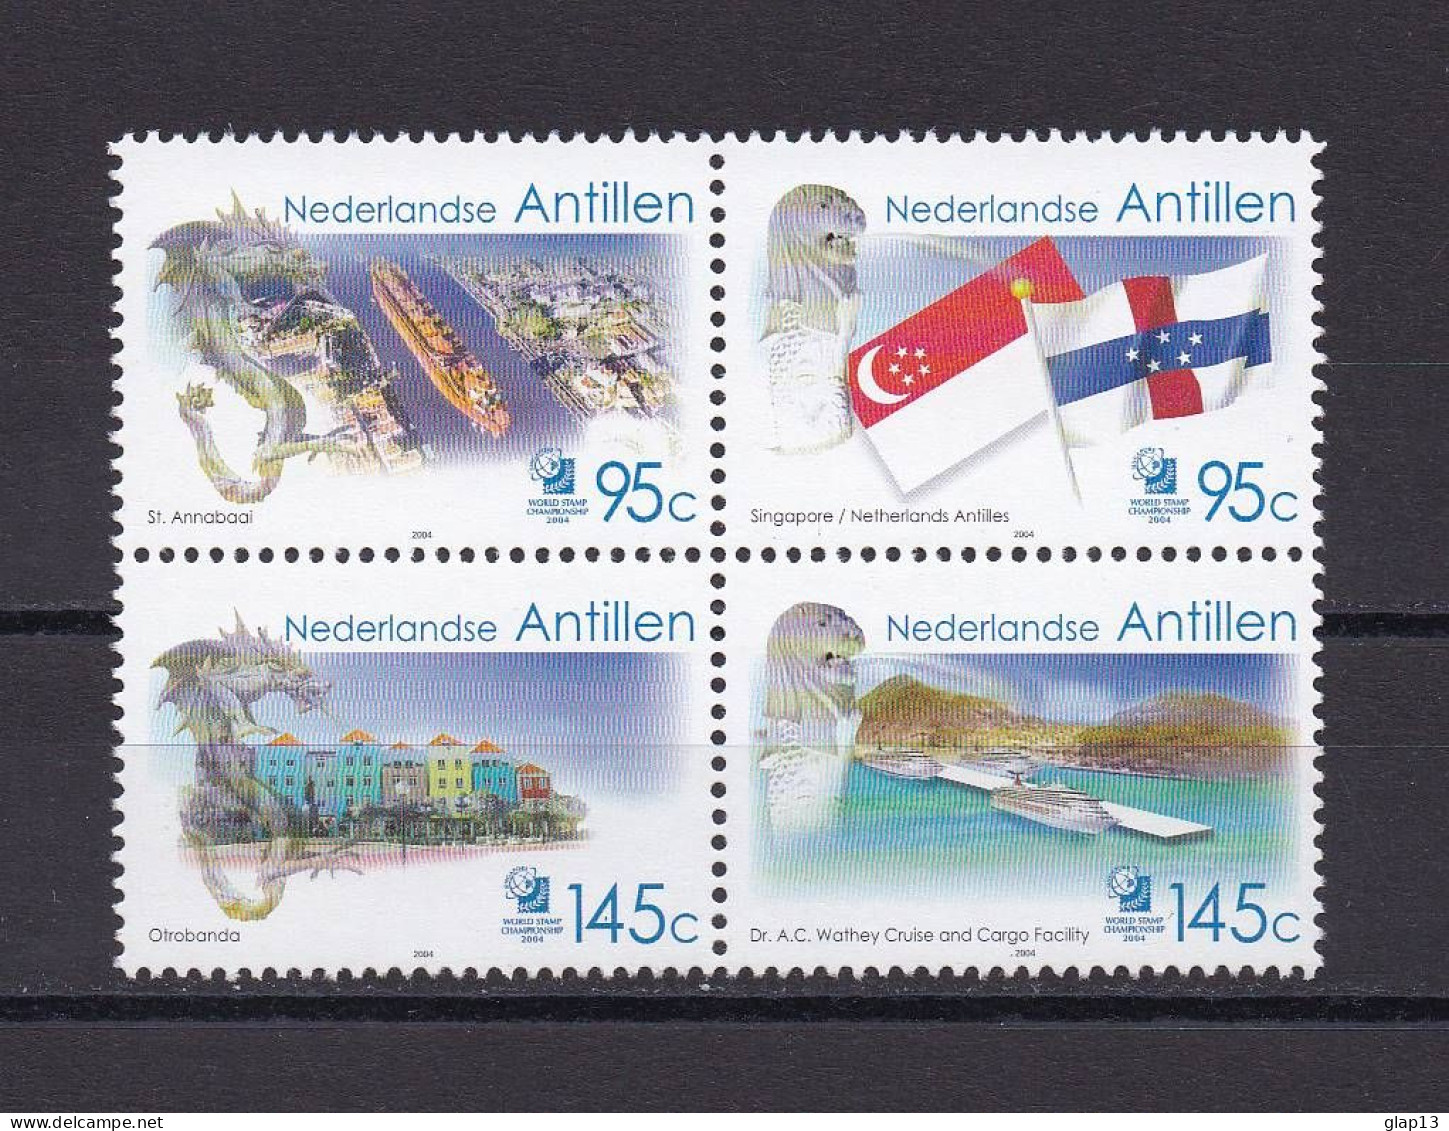 ANTILLES NEERLANDAISES 2004 TIMBRE N°1459/62 NEUF** EXPOSITION - West Indies